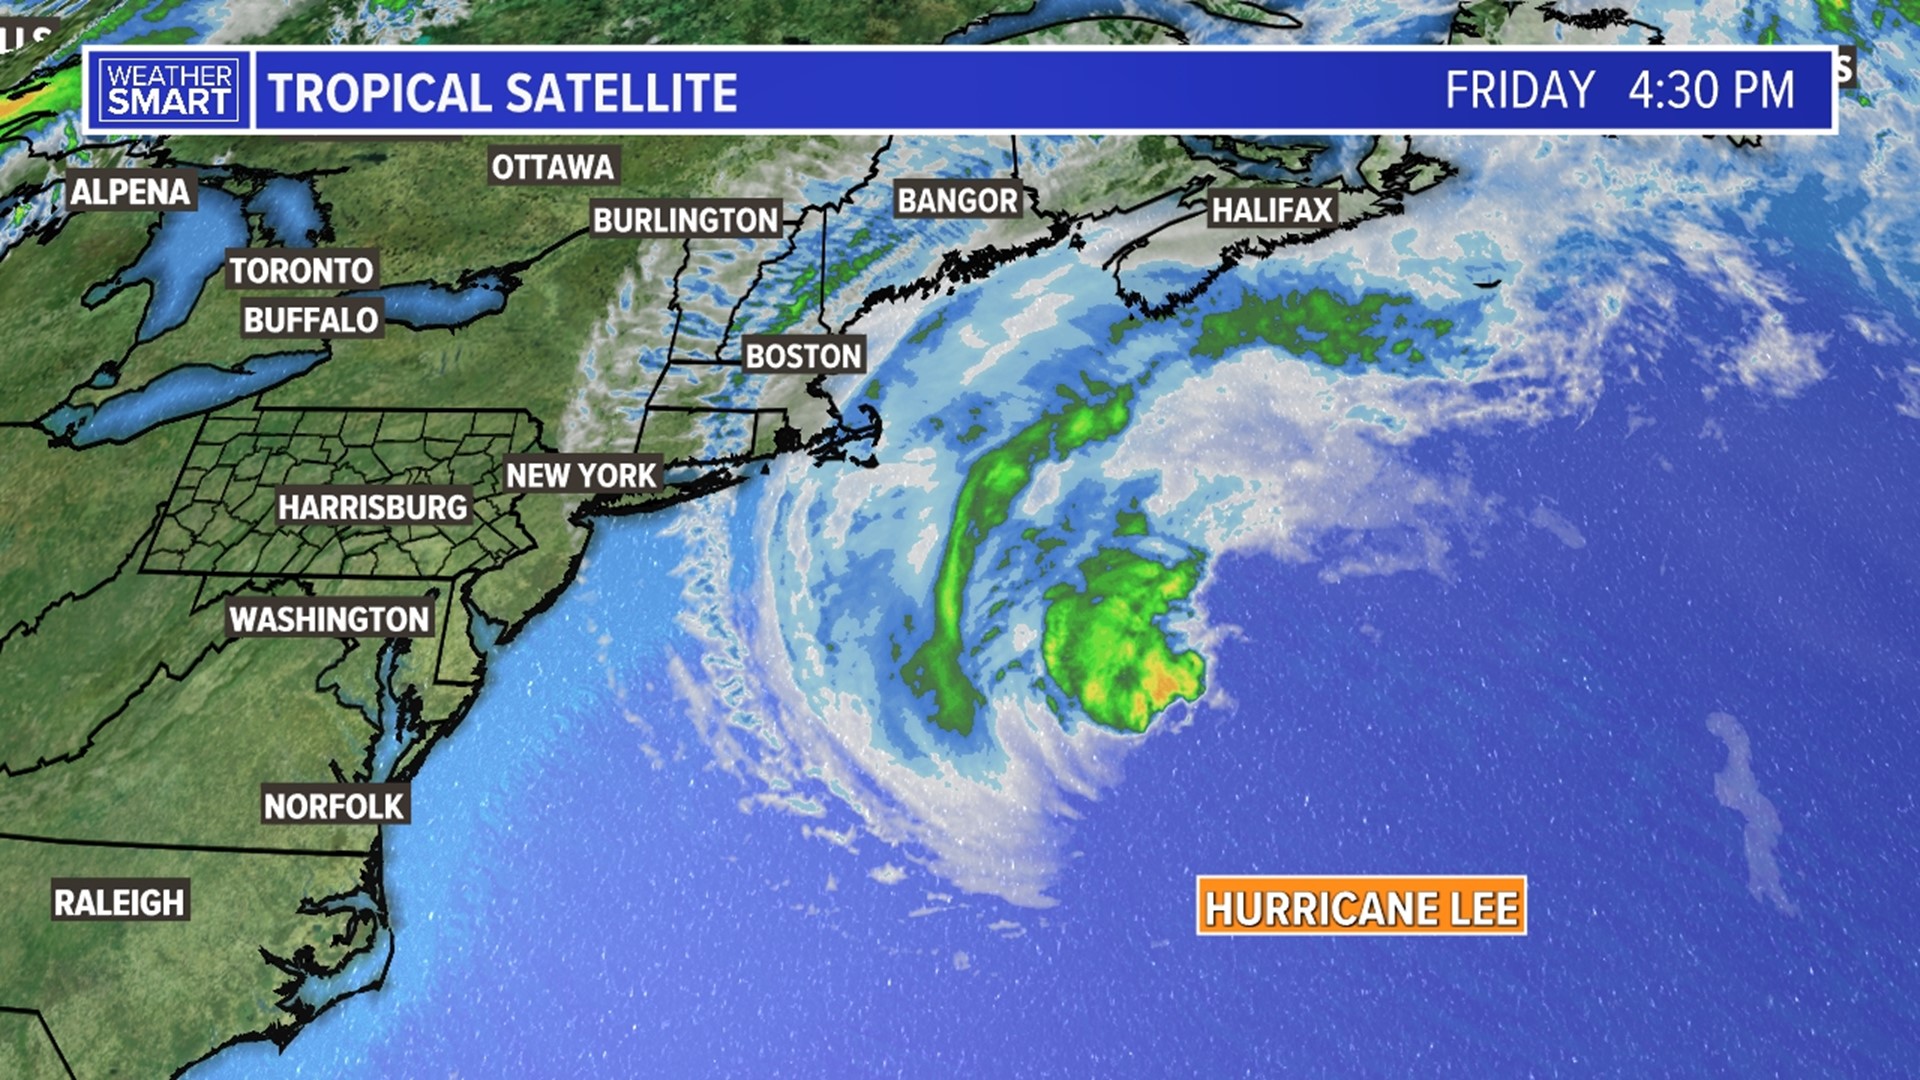 Tracking Hurricane Lee as it heads towards the New England Coast and eastern Canada.